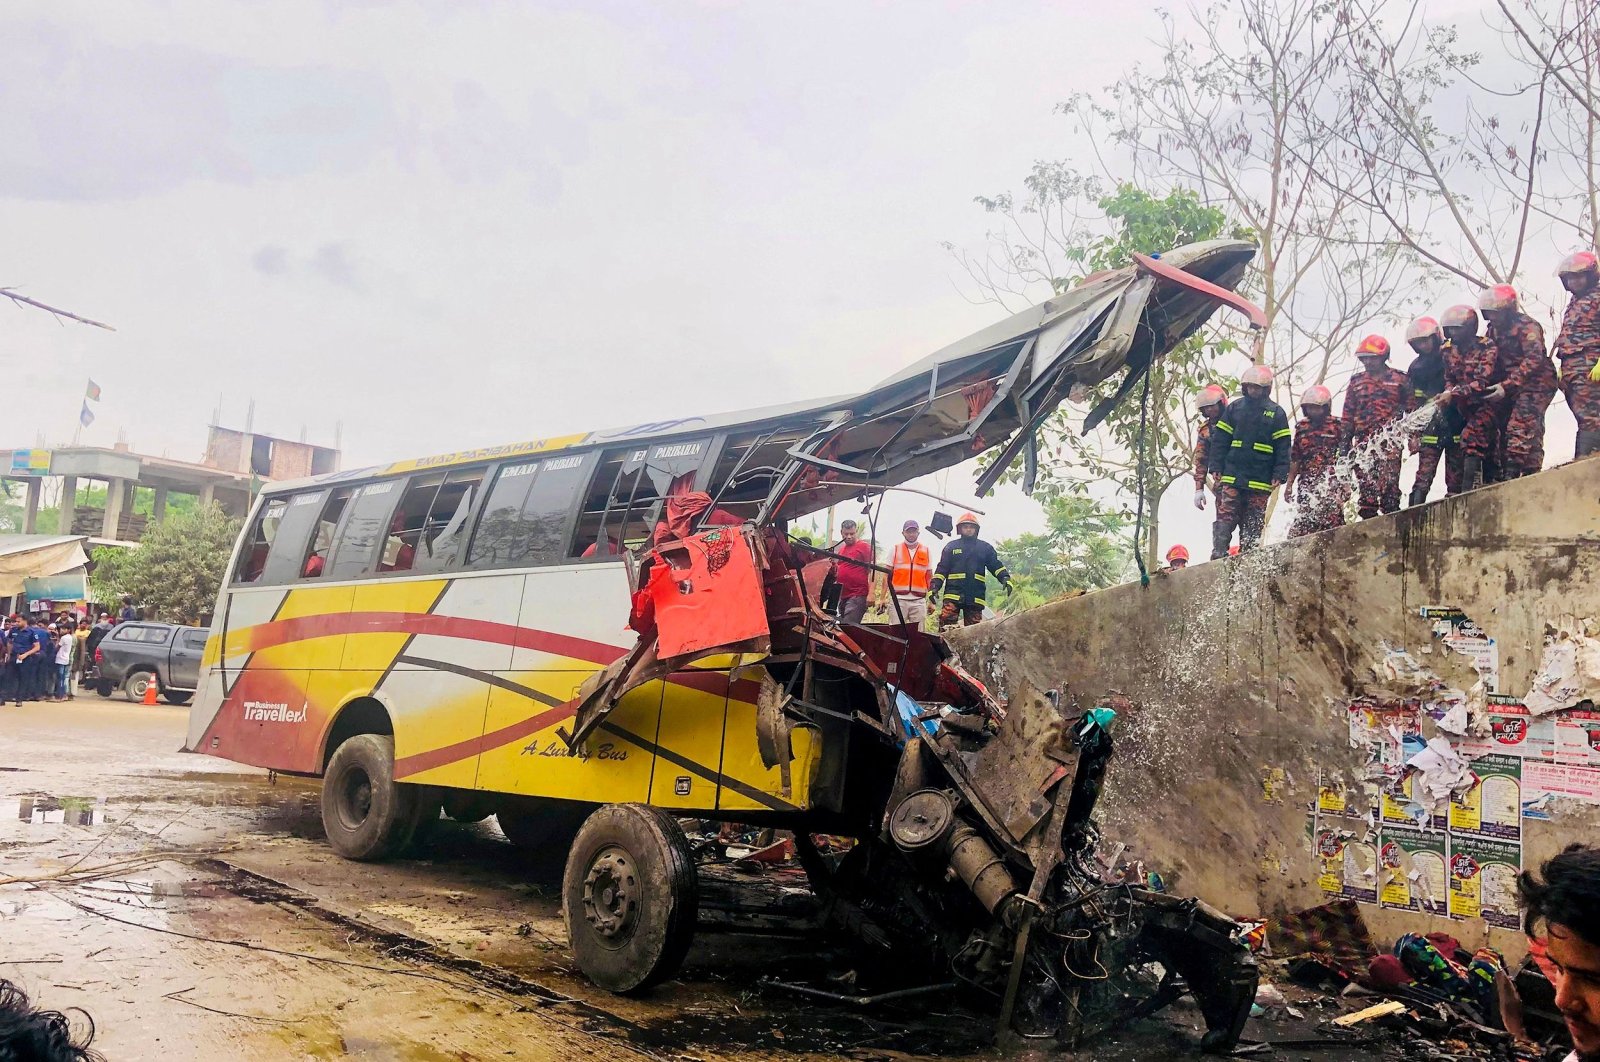 Firefighters at the scene of the bus accident that killed at least 19 people, in Shibchar, Madaripur, Bangladesh, March 19, 2023. (AFP Photo)